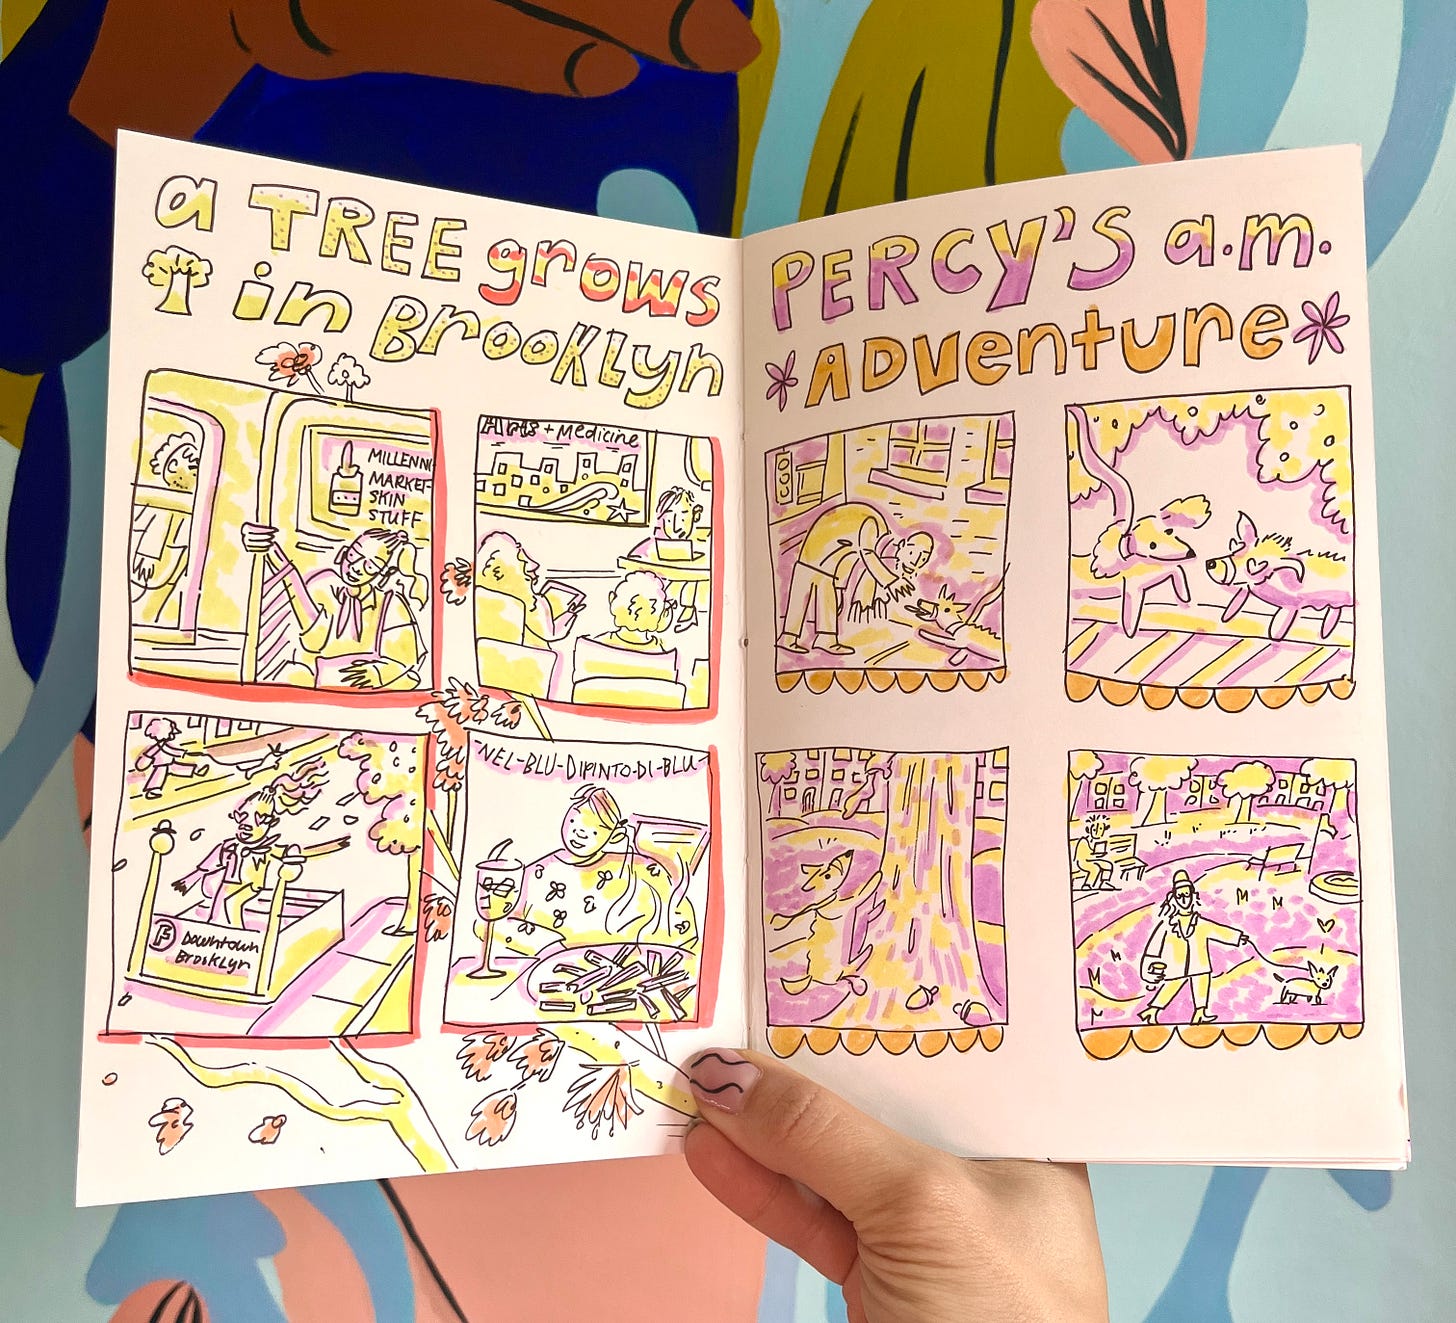 A booklet opens to two pages of comic diaries entitled A Tree Grows in Brooklyn with snippets of New York, and Percy's AM Adventure with pictures of my dog on a walk around town.